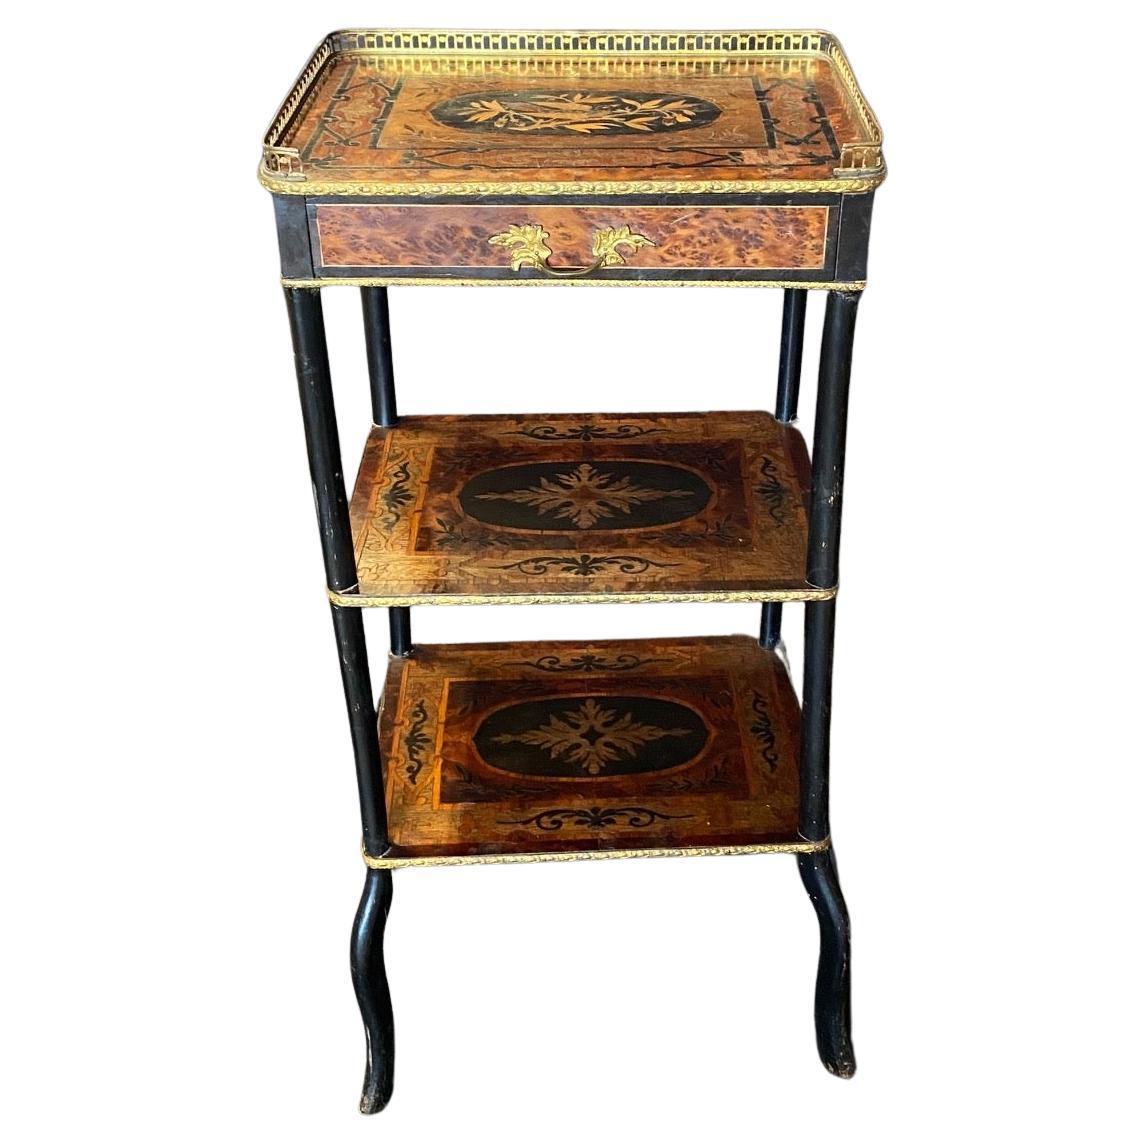 French Louis XVI 3 Tier Marquetry Inlaid Etagere Side Table For Sale